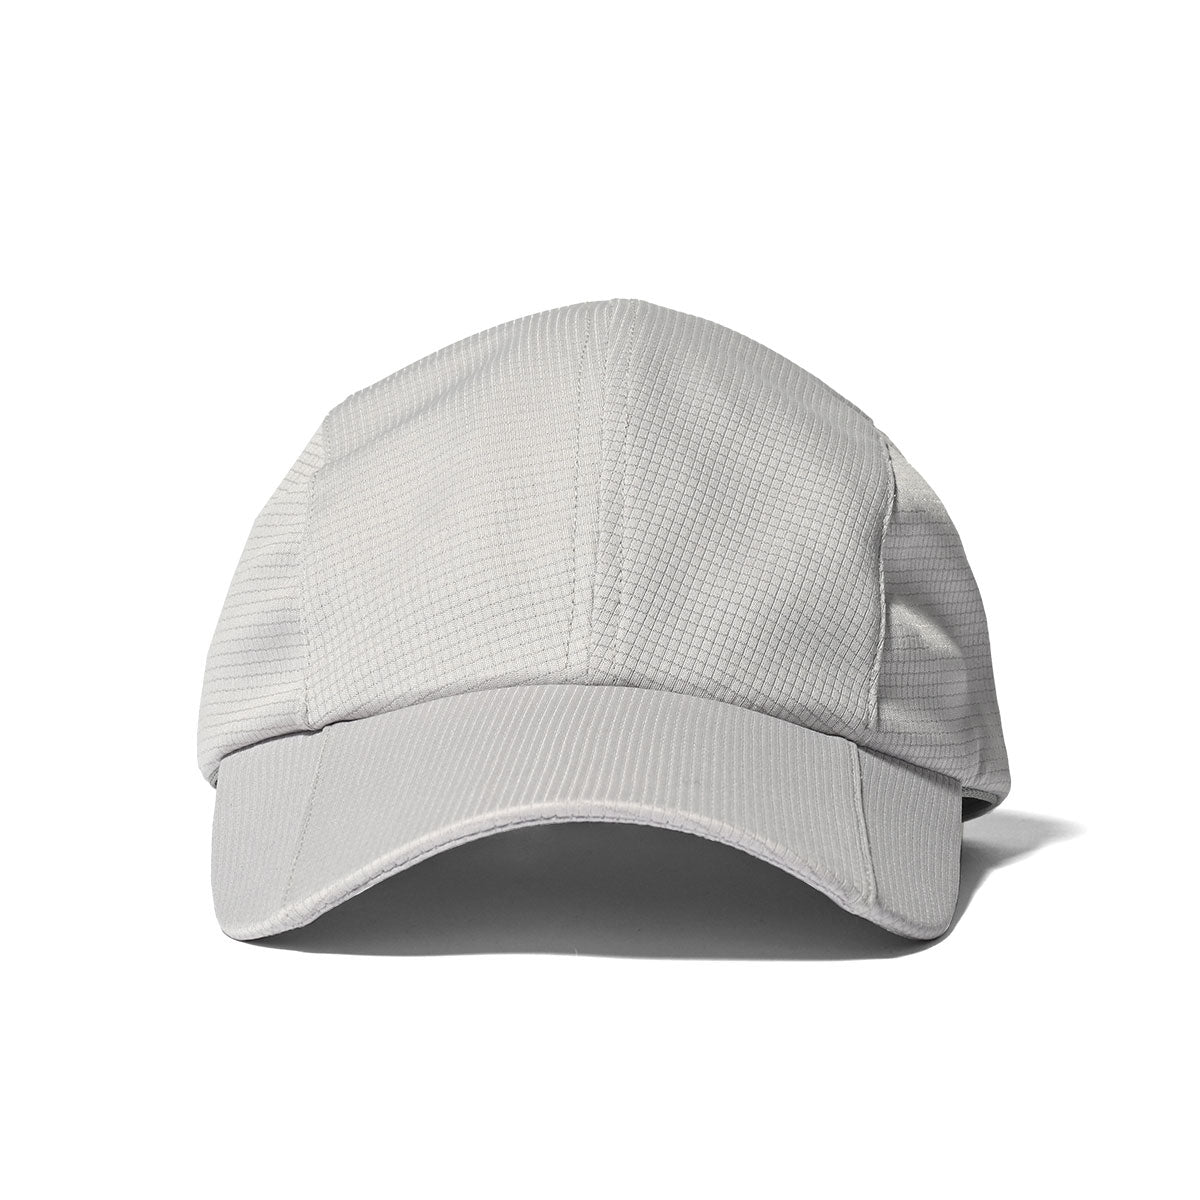 HOMEGAME - SOLID SPORT CAP GRAY【HG241416】